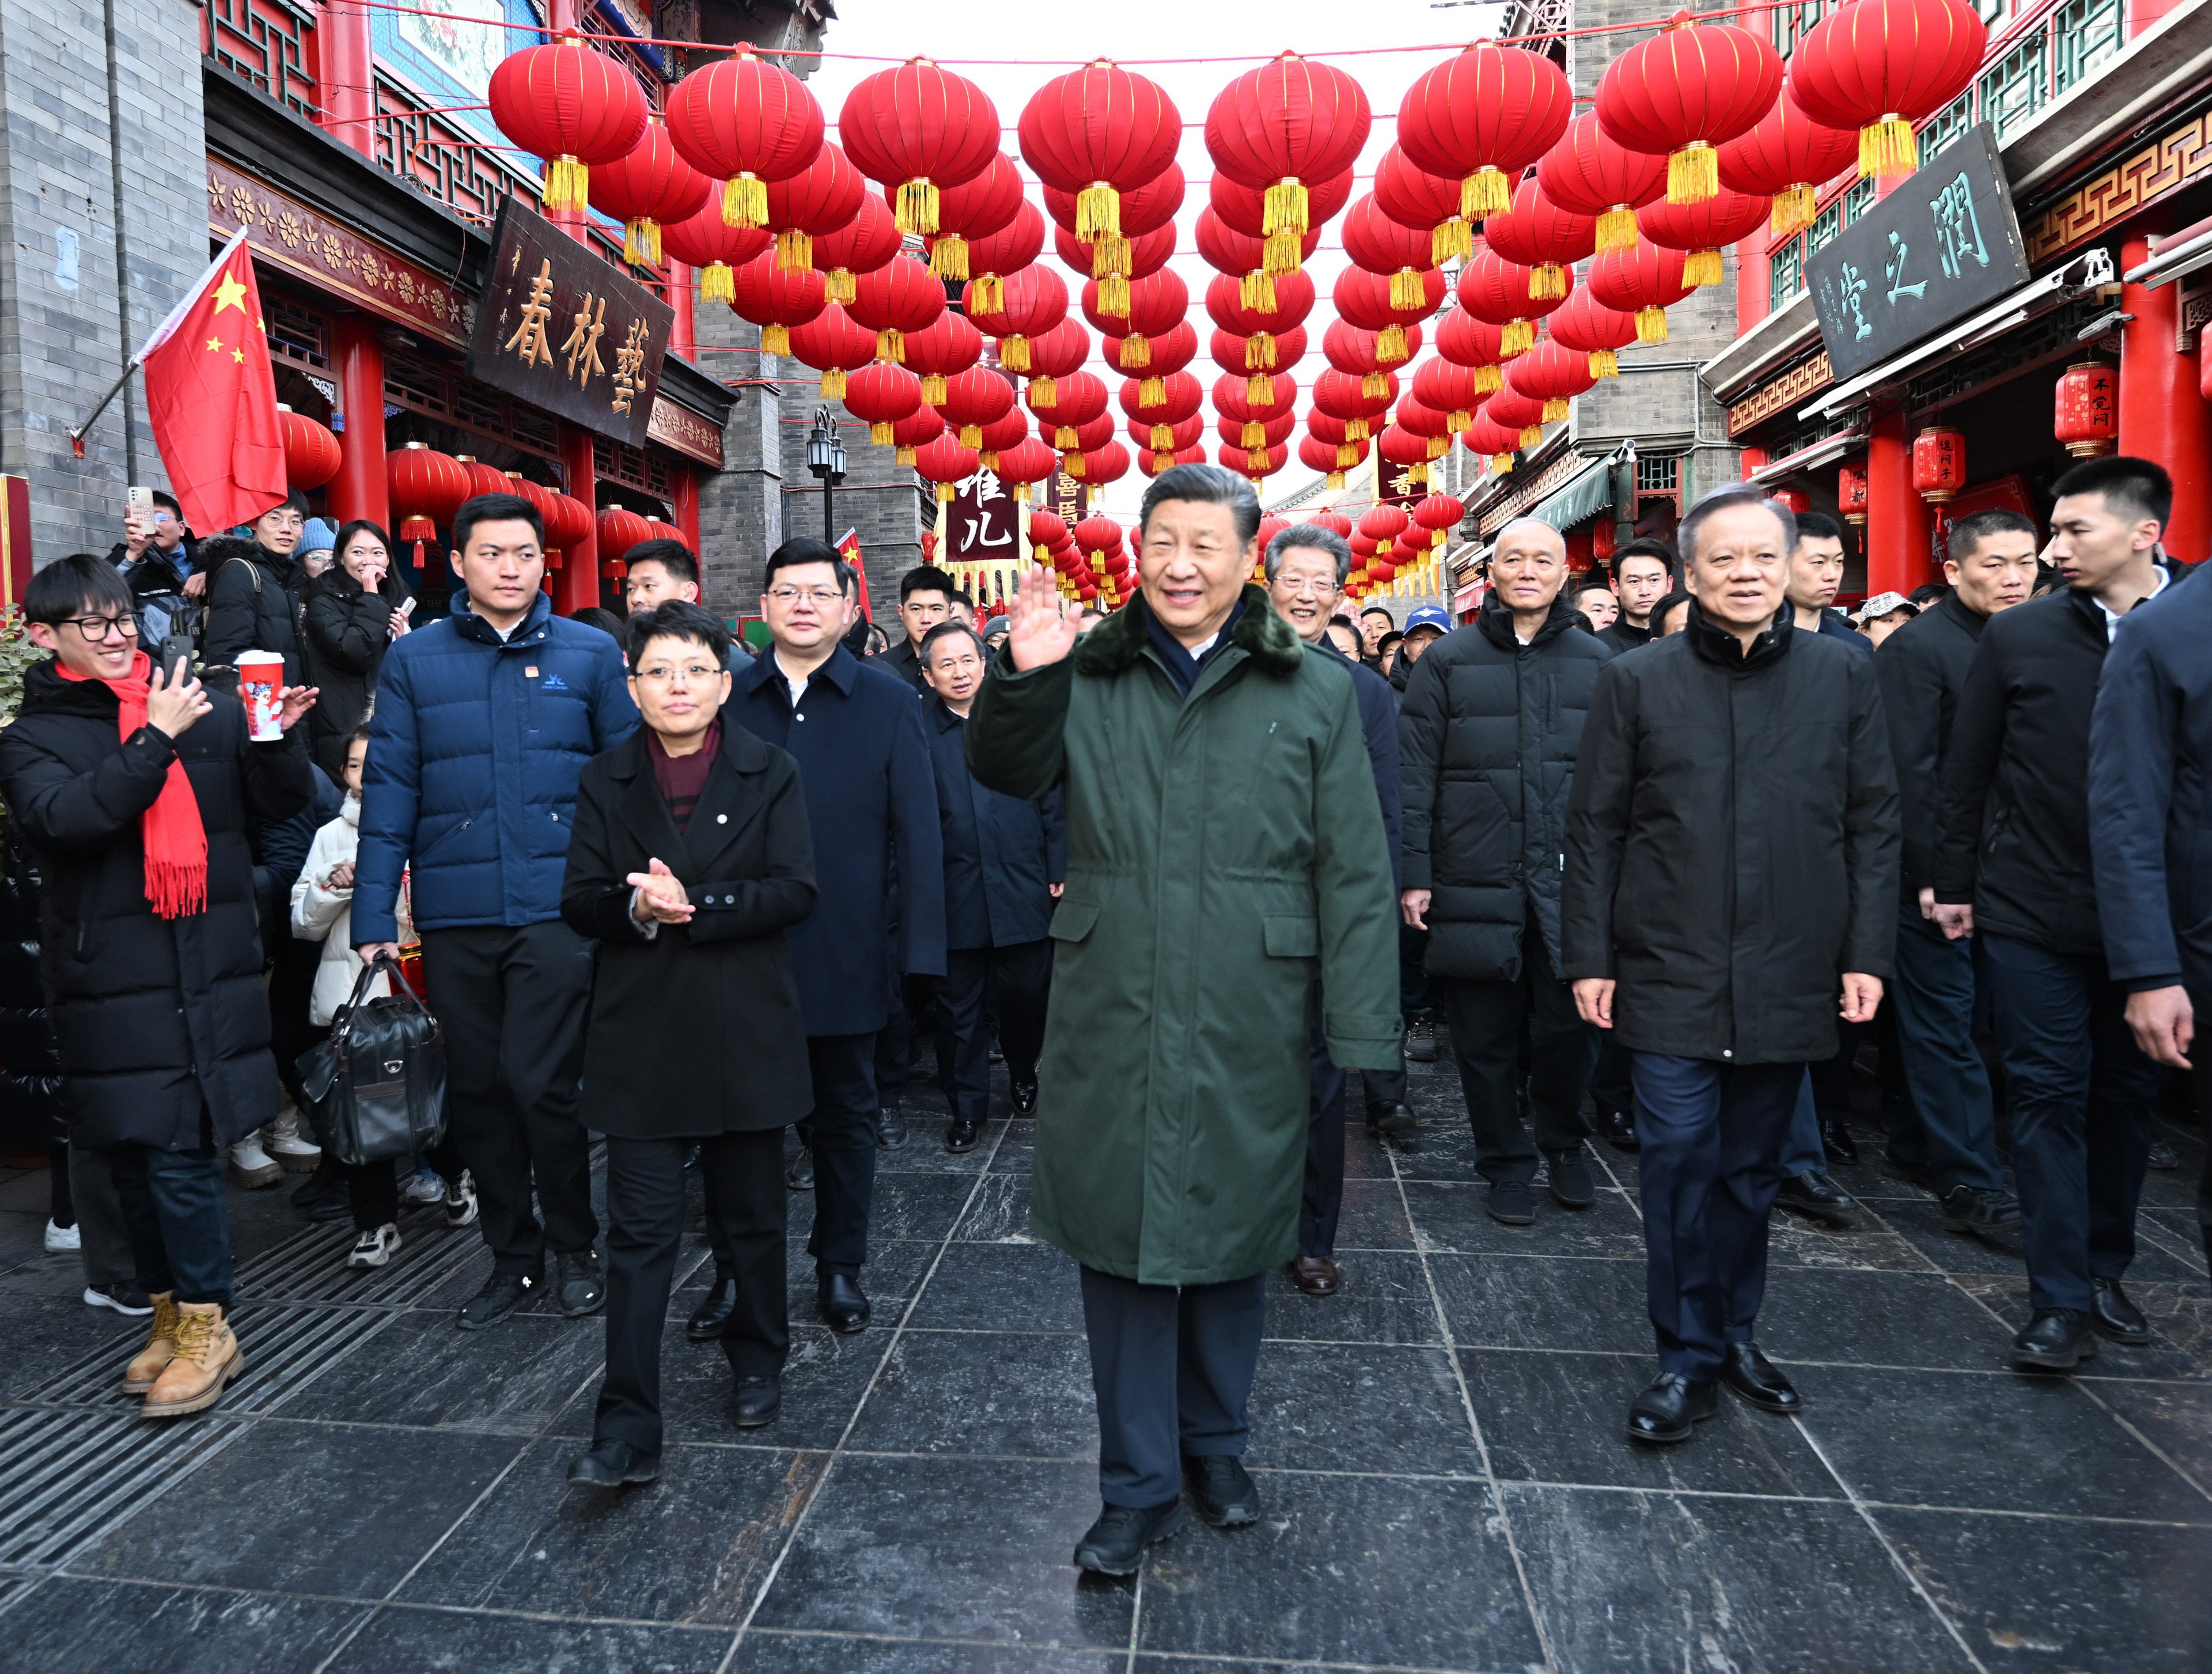 Since President Xi Jinping’s call to “tell China’s story well” there has been a rise in assertive and confrontational rhetoric from officials and state media. Photo: Xinhua